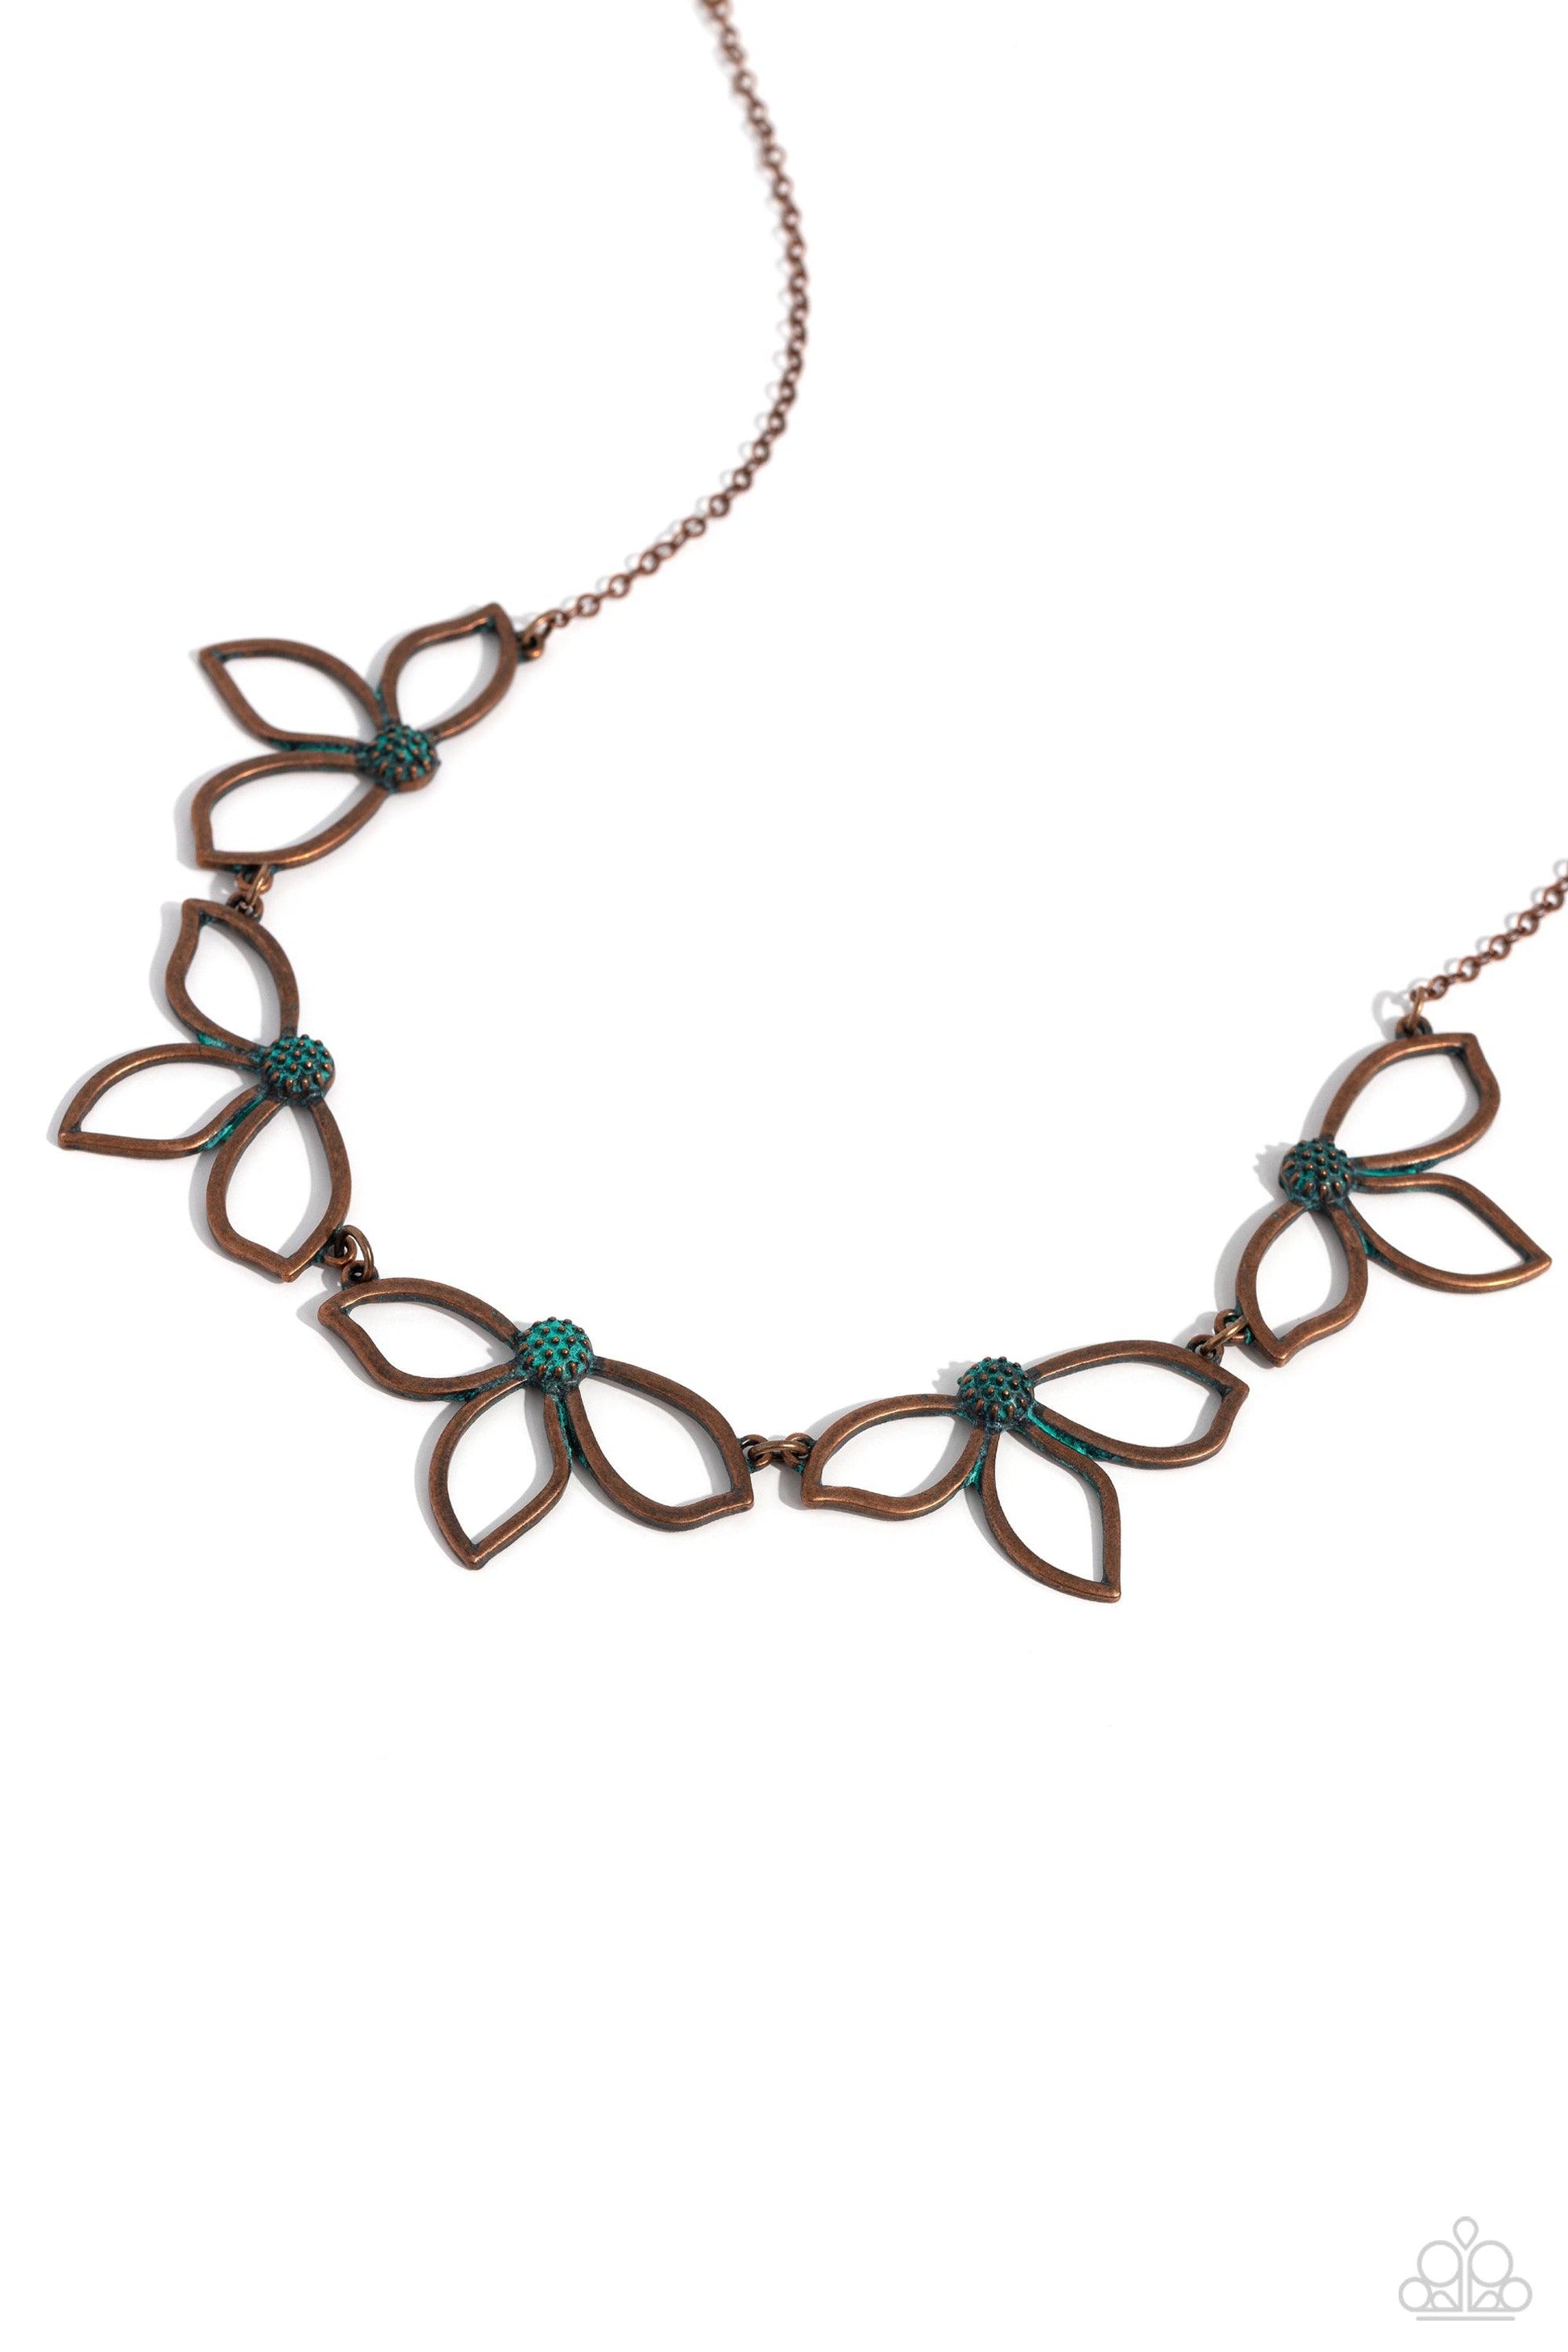 Paparazzi Accessories - Petal Pageantry - Copper Necklace - Bling by JessieK